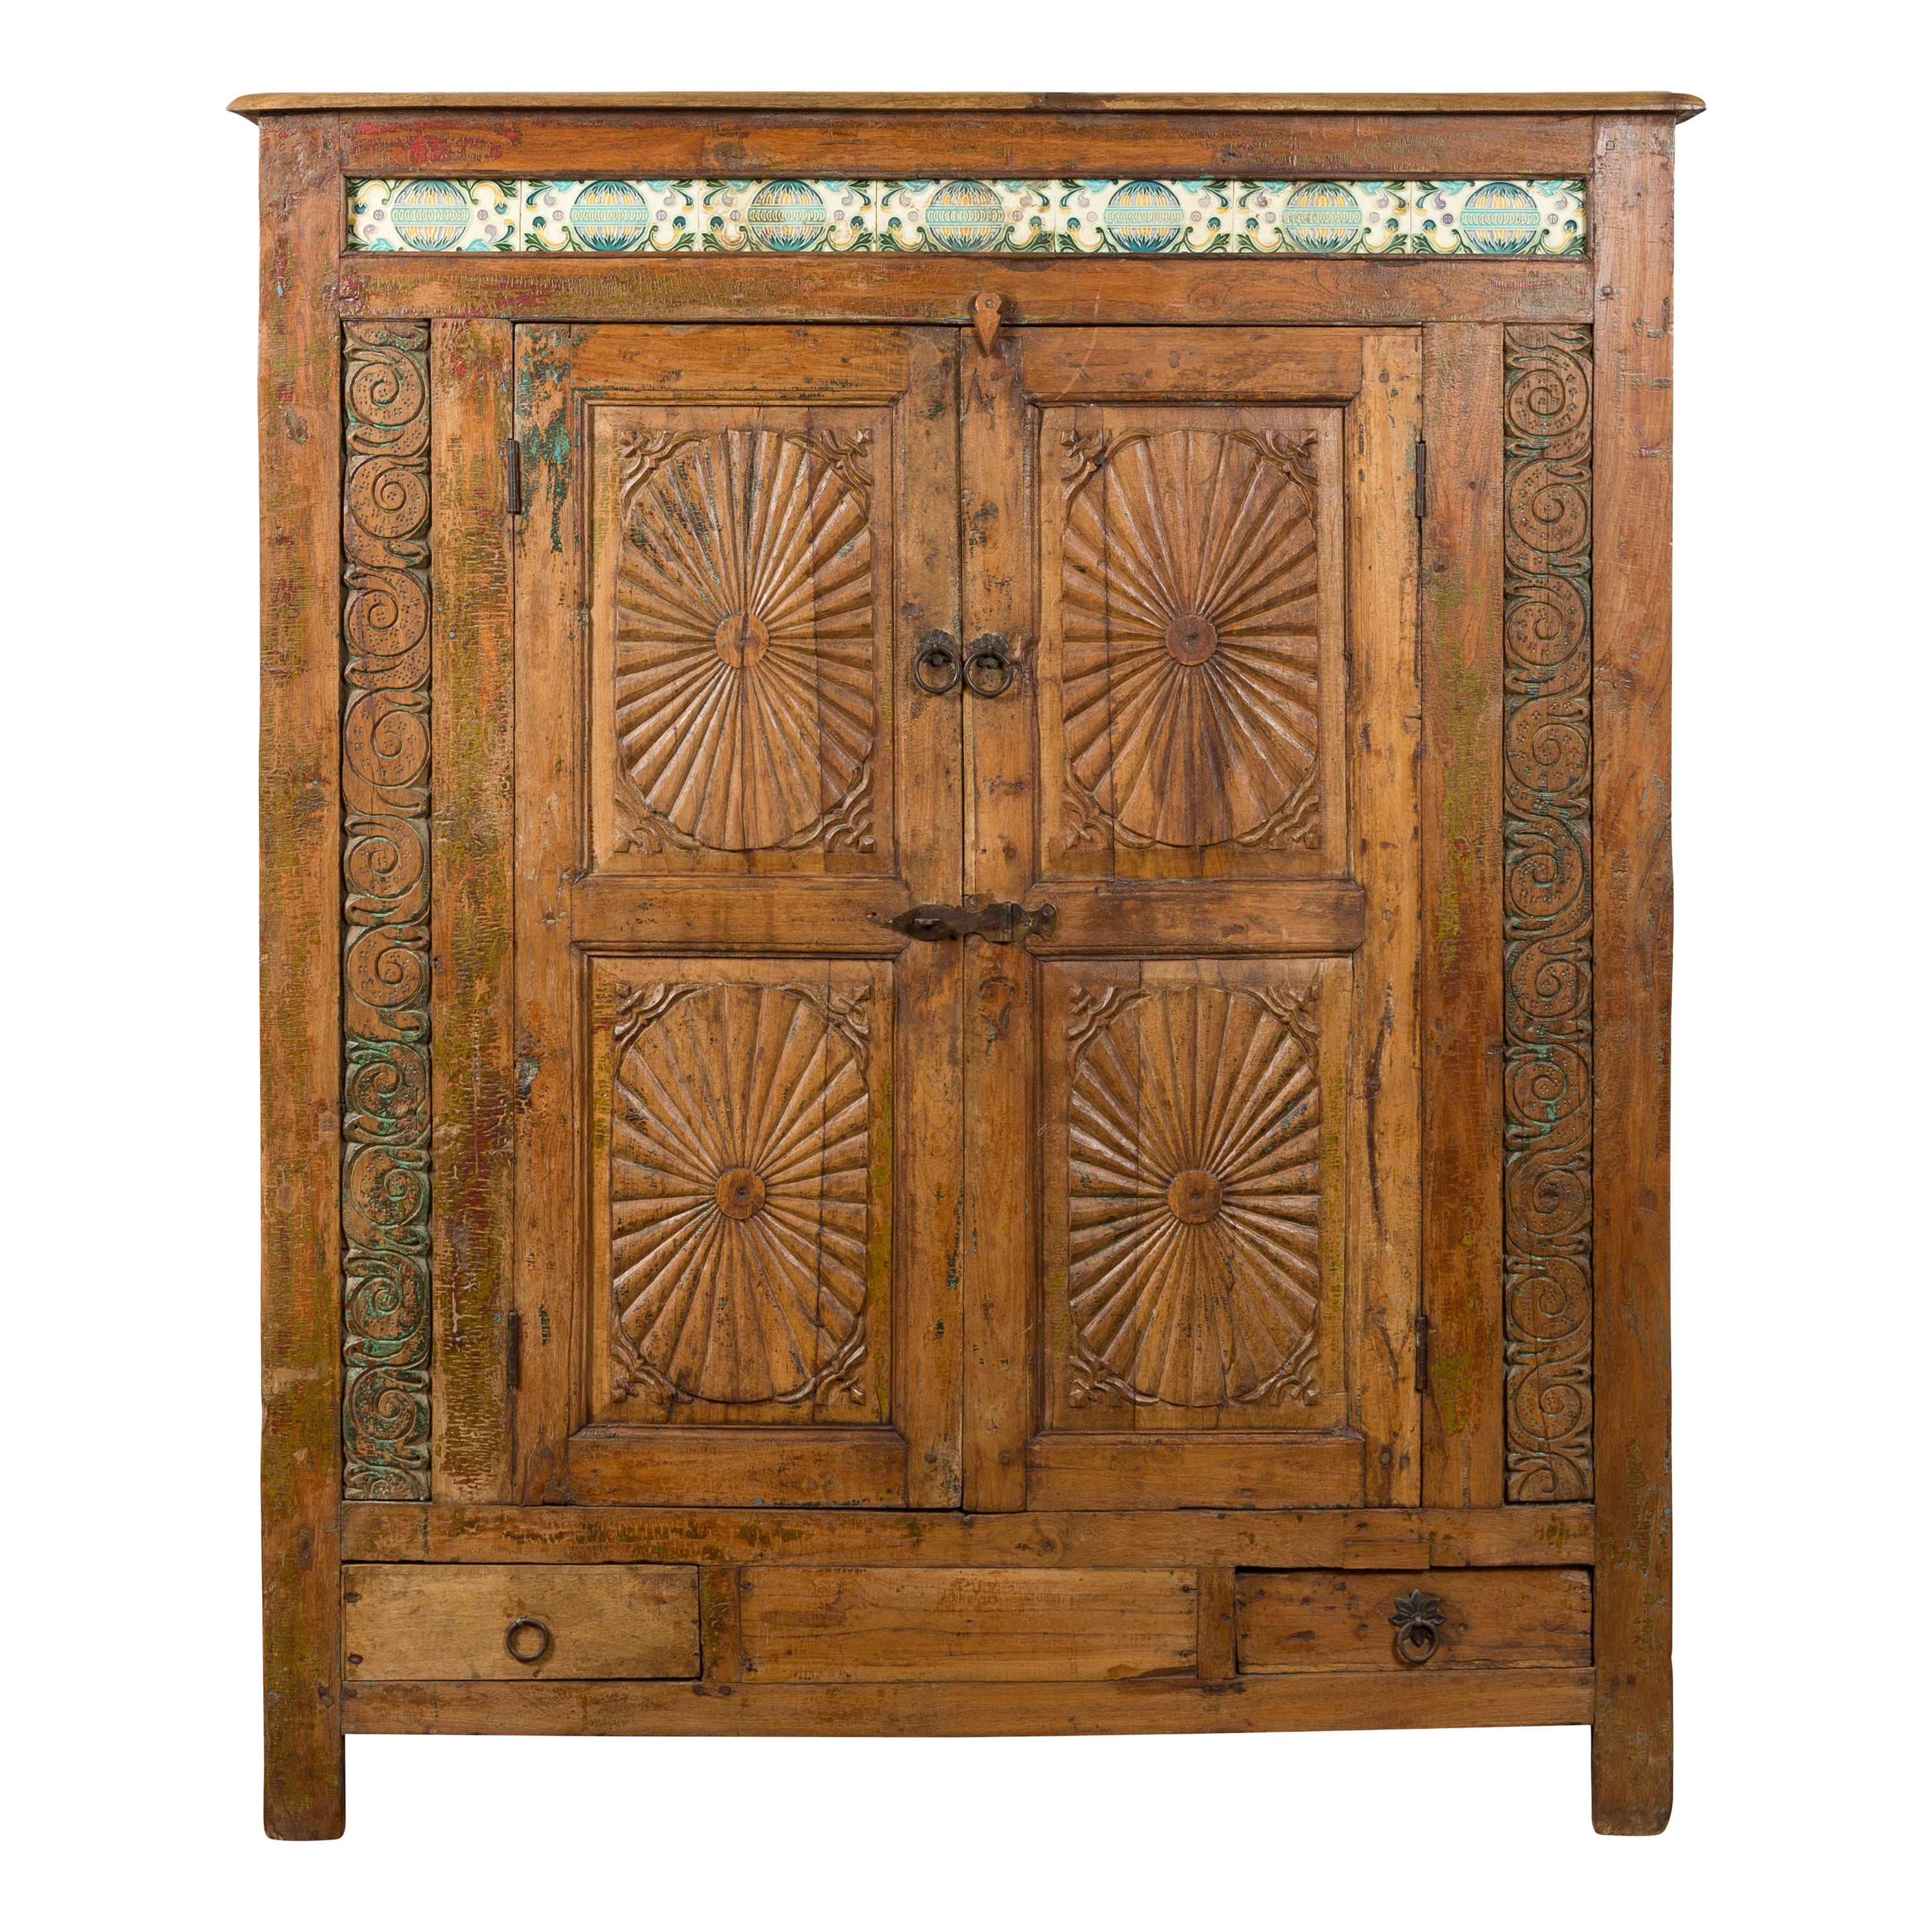 Indonesian 19th Century Cabinet with Sunburst Design and Blue & Yellow Enameled 